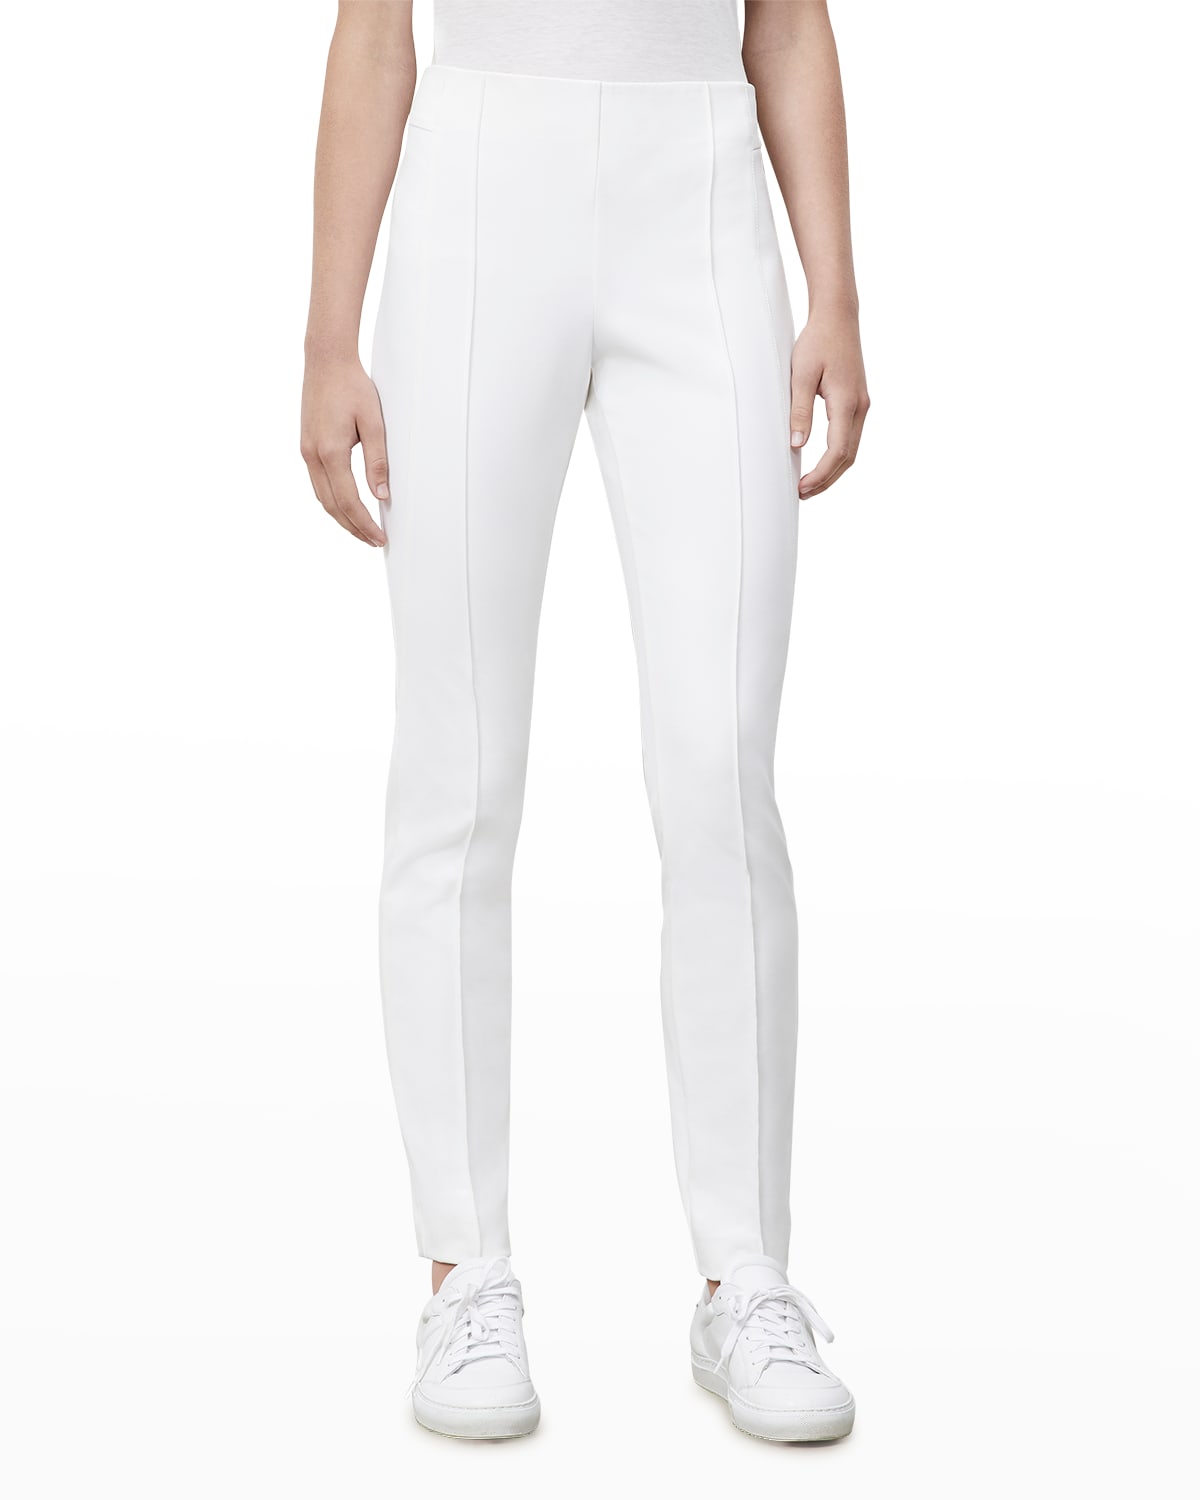 Petite Gramercy Acclaimed Stretch Pants